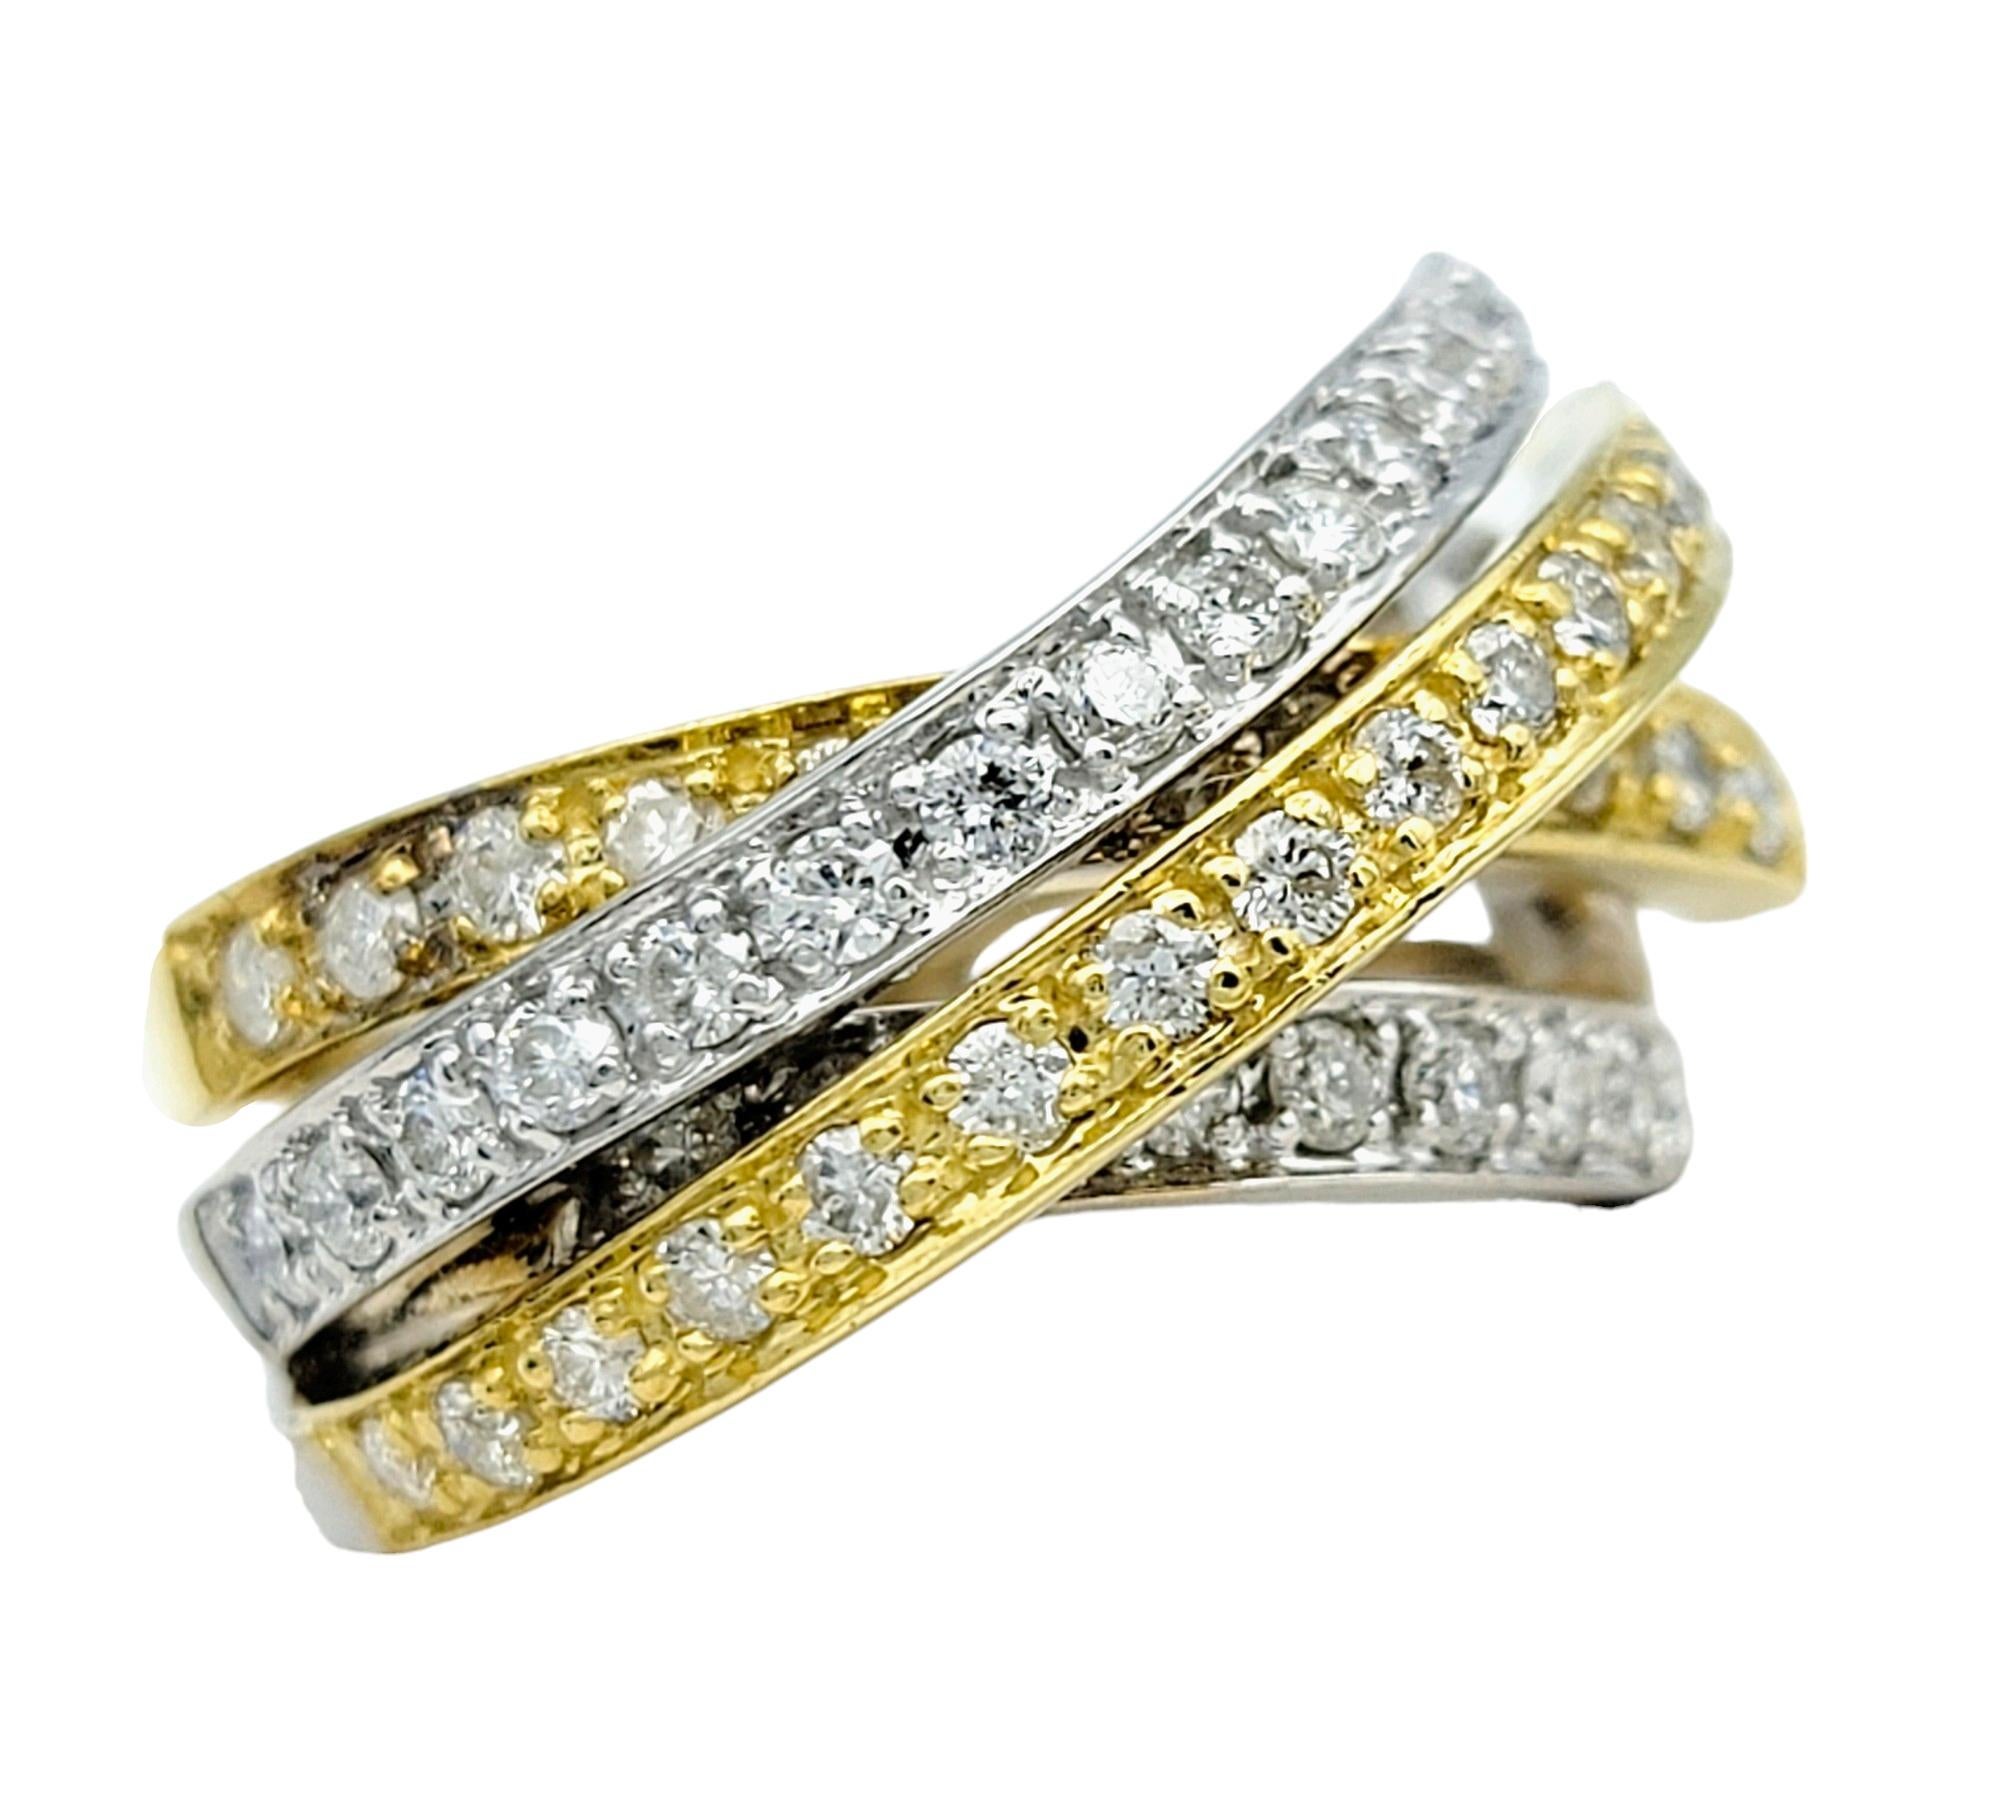 Ring Size: 6.75

This beautiful Sonia B diamond ring is a stunning blend of elegance and sophistication, crafted with meticulous attention to detail. Set in 18 karat white and yellow gold, this exquisite piece features a unique overlapped design,